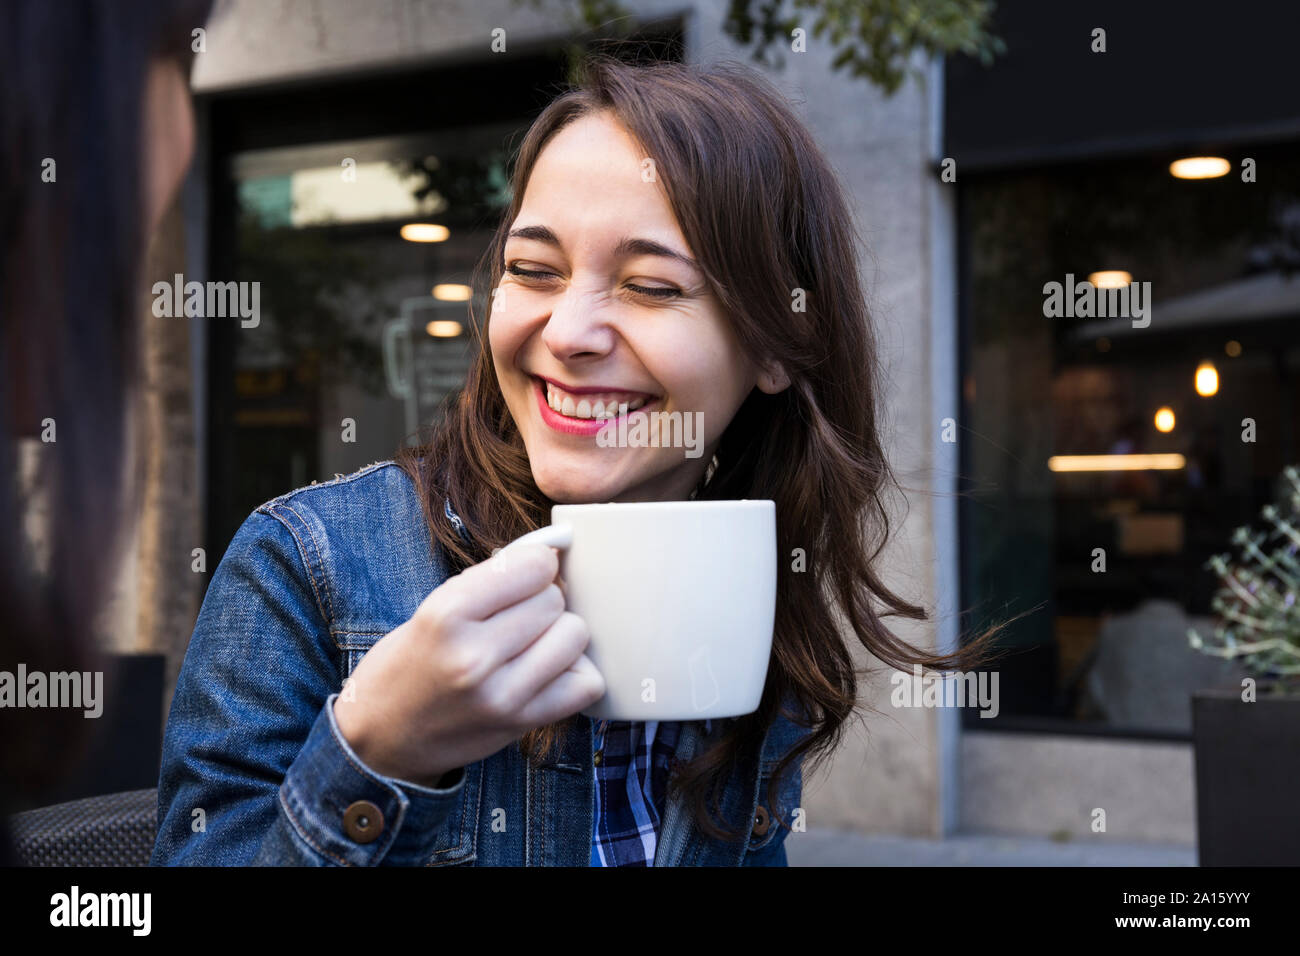 Happy young woman laughing with eyes closed and holding coffee cup in outside cafe in Madrid, Spain Stock Photo